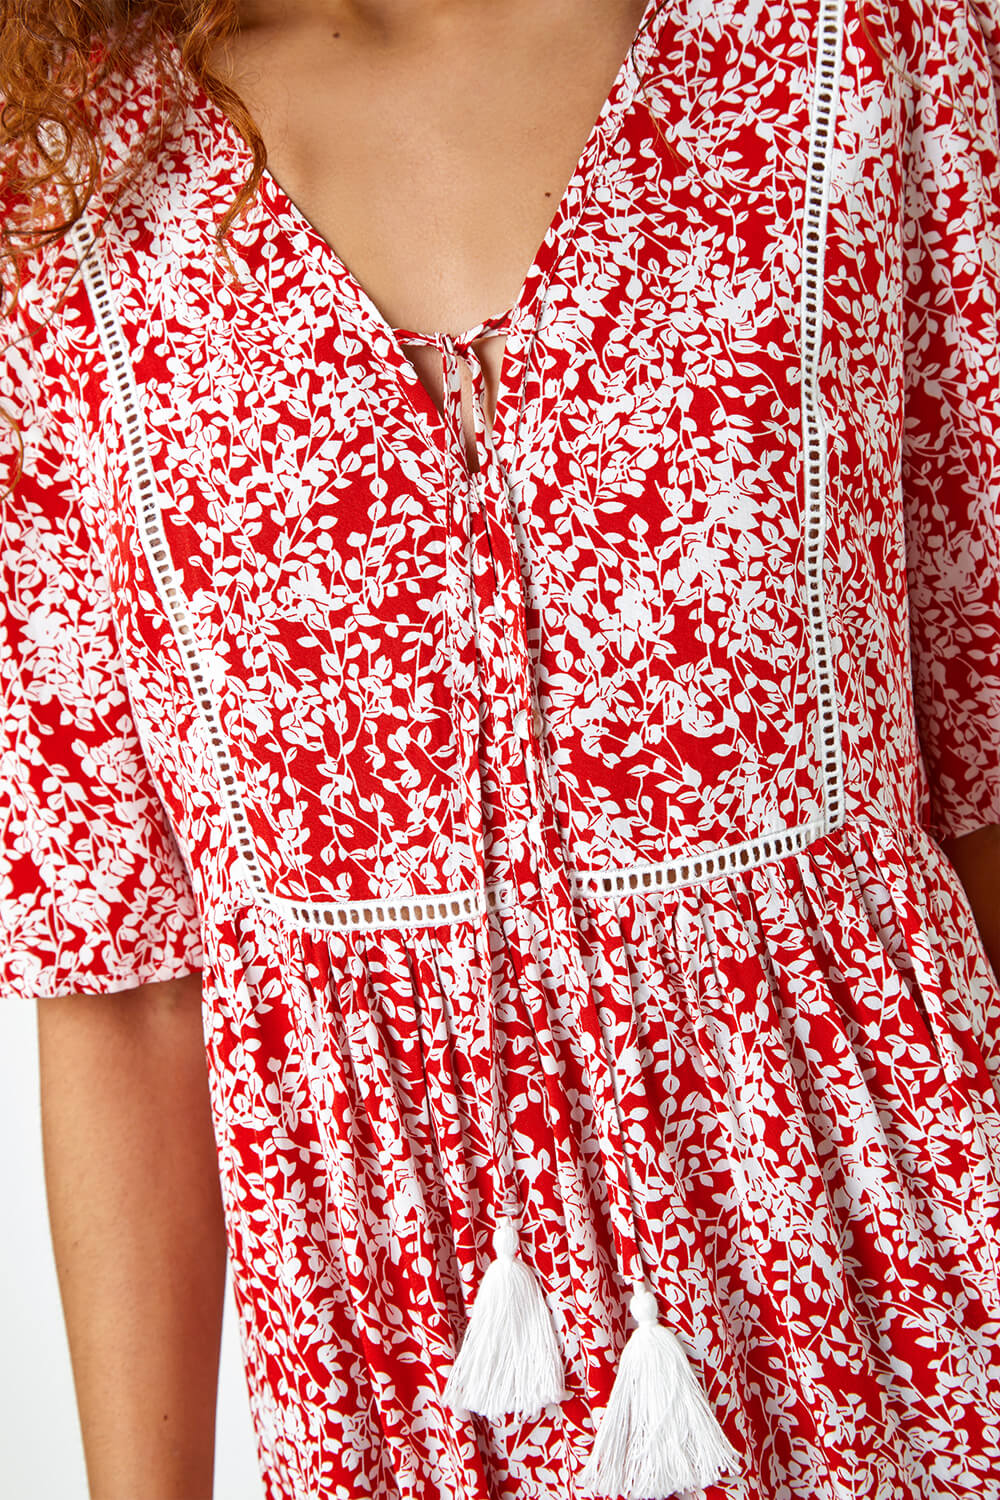 Red Ditsy Floral Tie Smock Top, Image 5 of 5